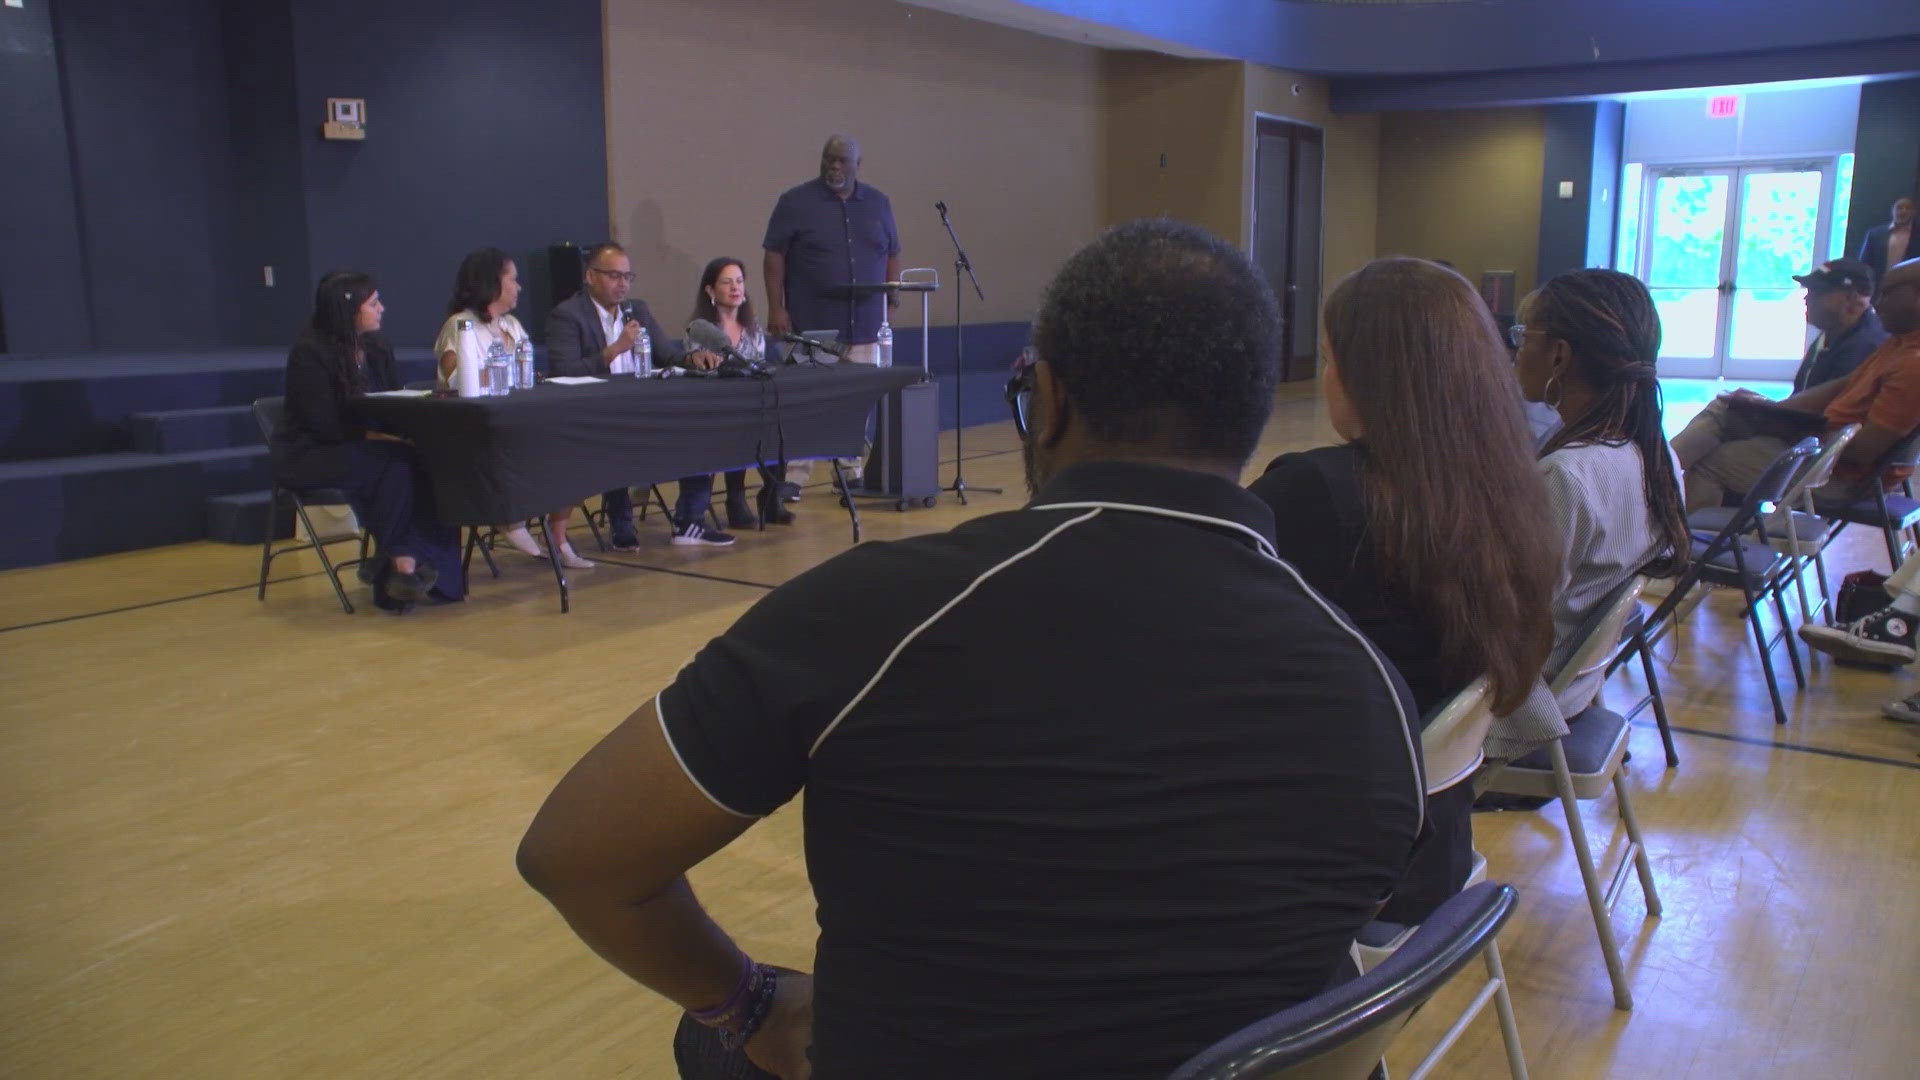 Members of Cultural and Racial Equity for Every Dragon and Southlake Anti-Racism Coalition spent almost an hour sharing gut-wrenching allegations of racism.